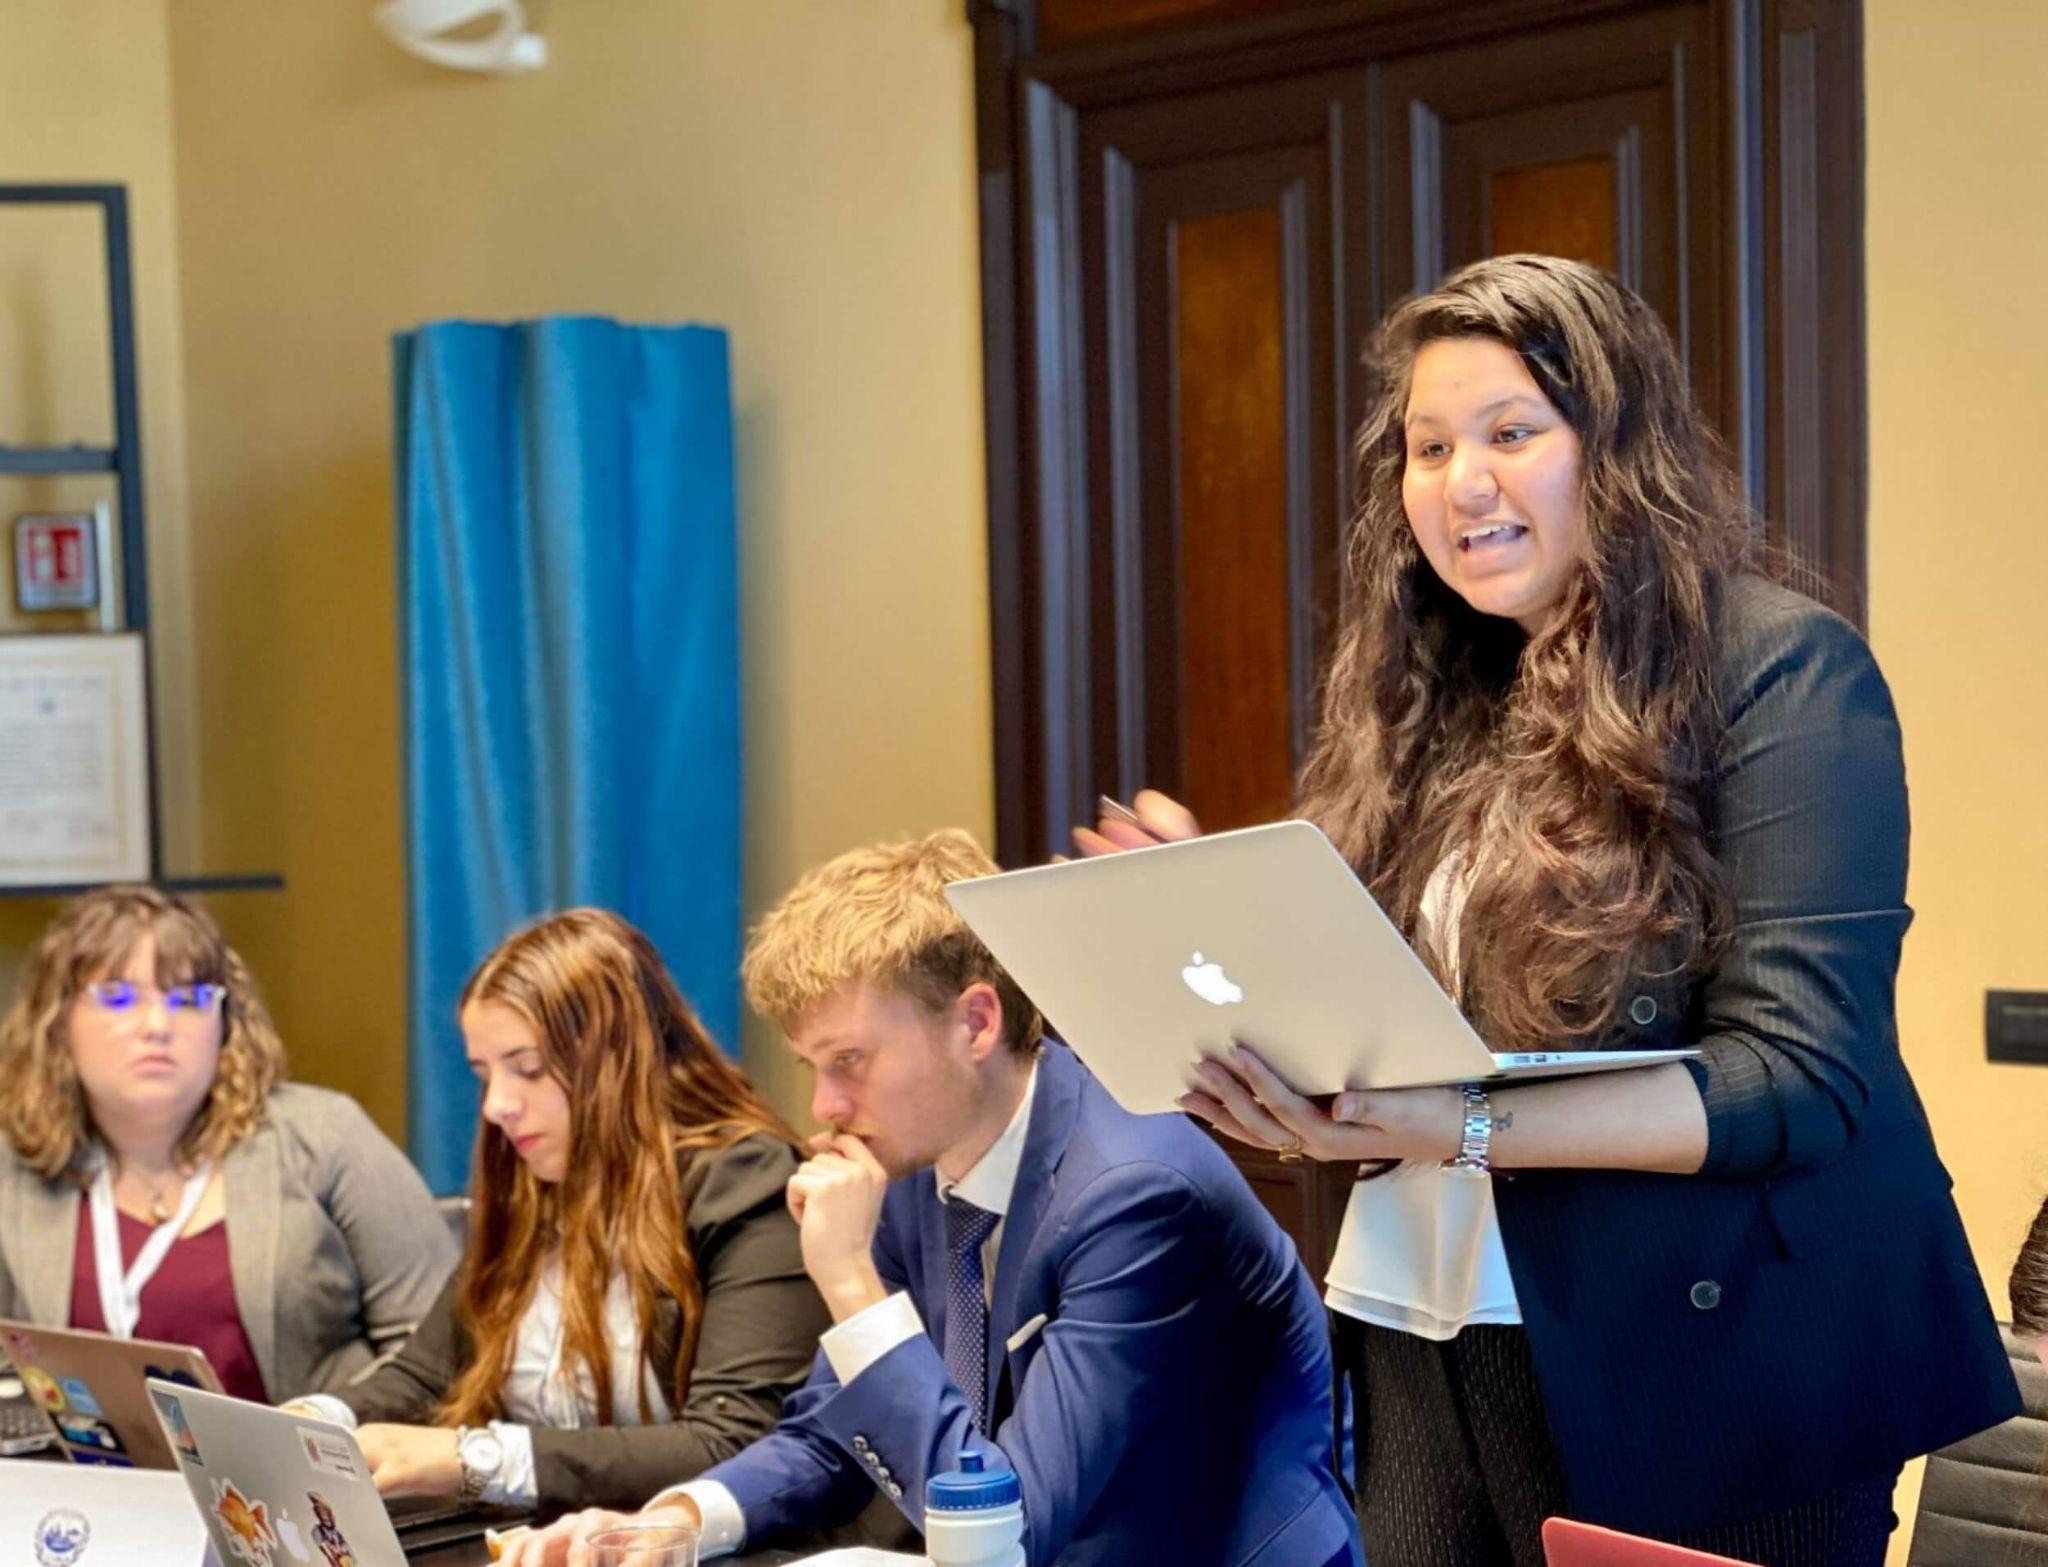 A business student at a university in Rome presenting in front of her class